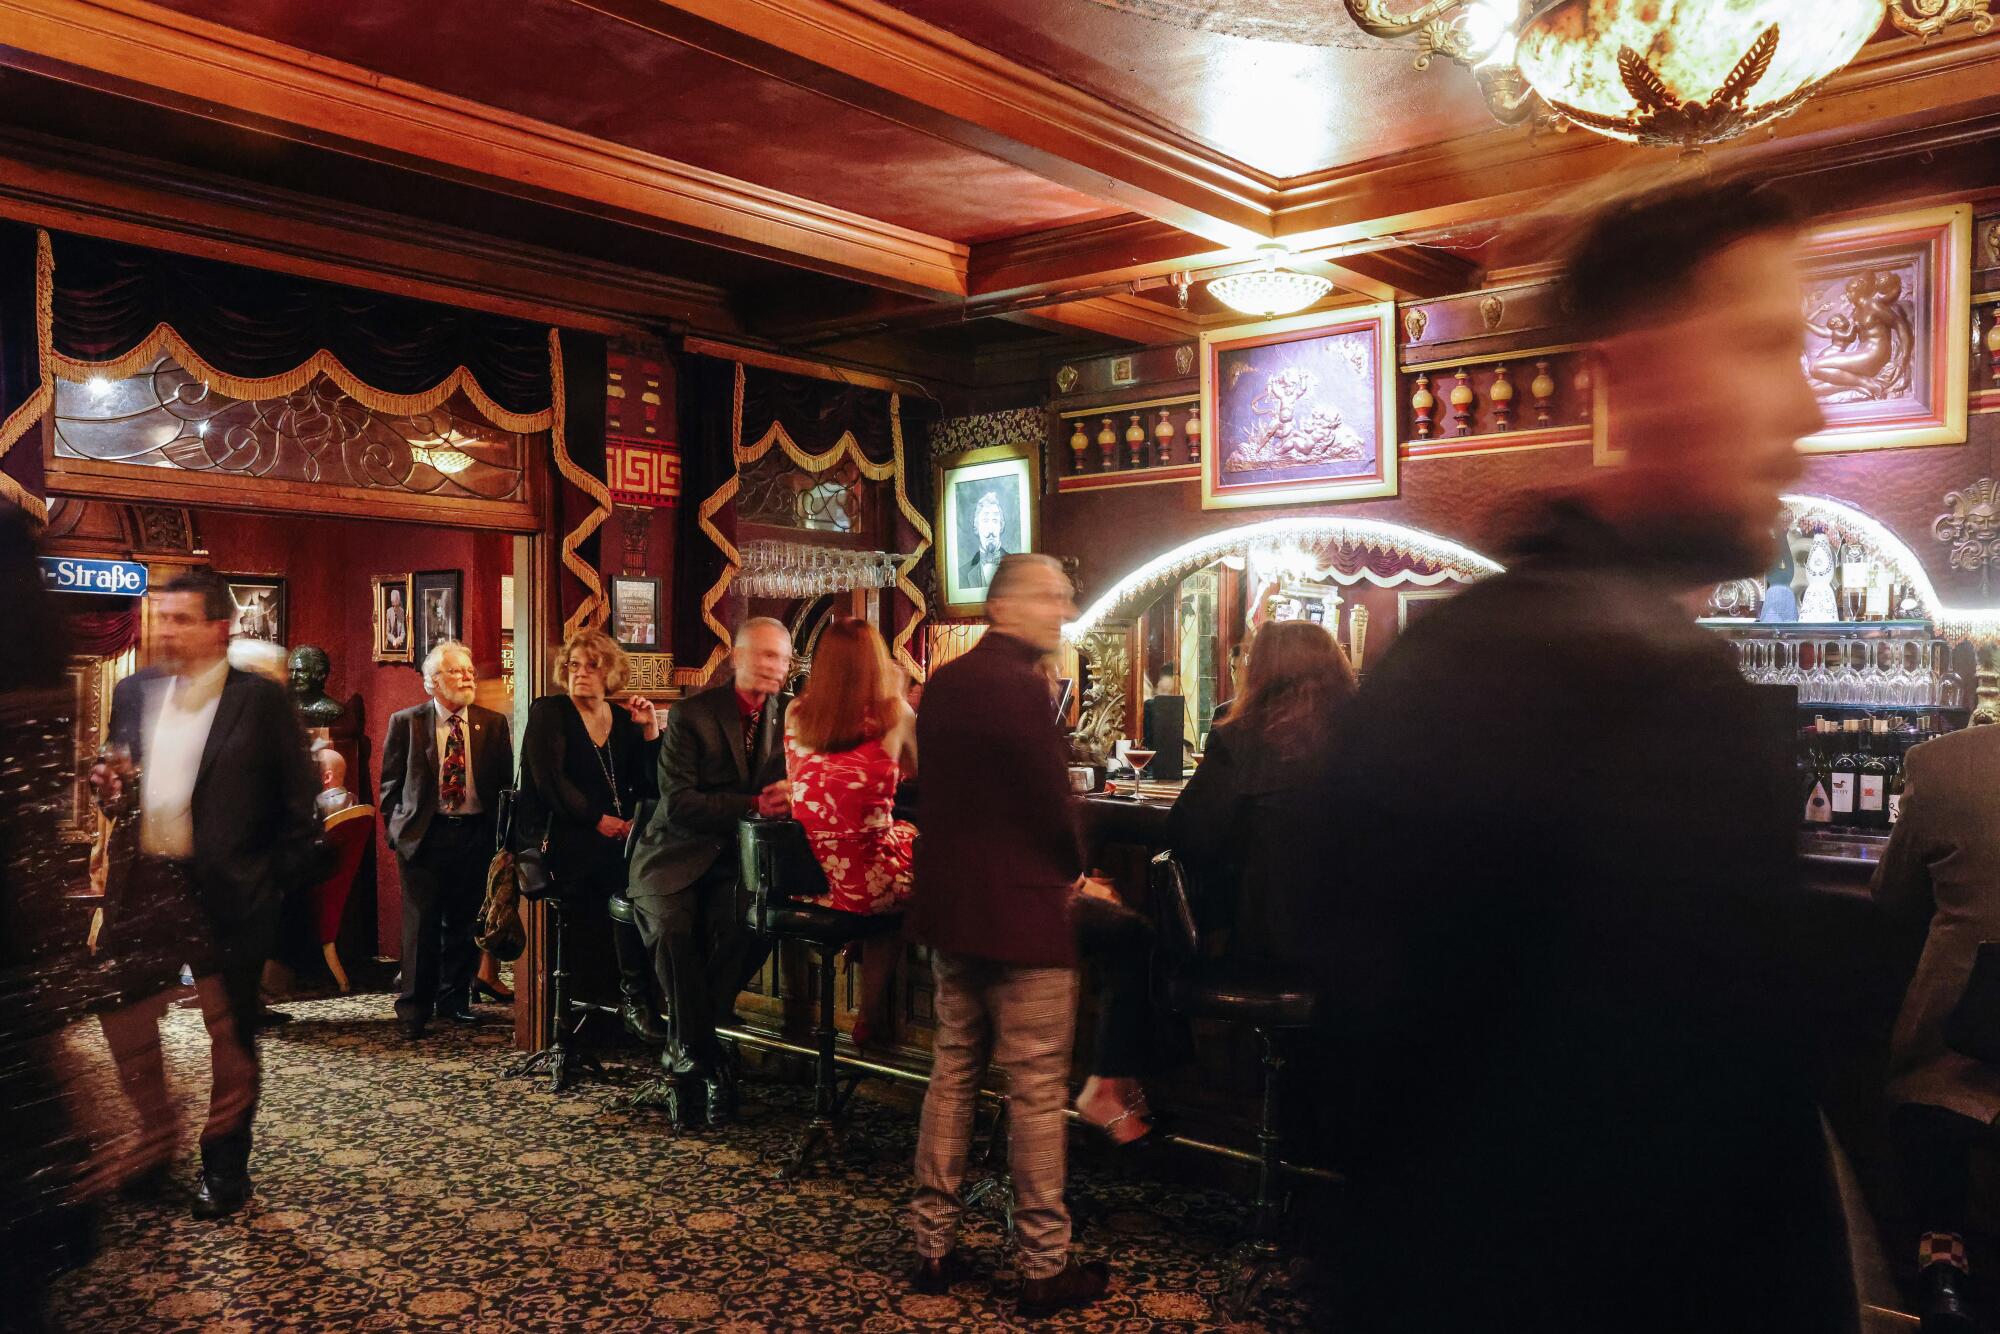 People order drinks at a bar inside the Magic Castle.